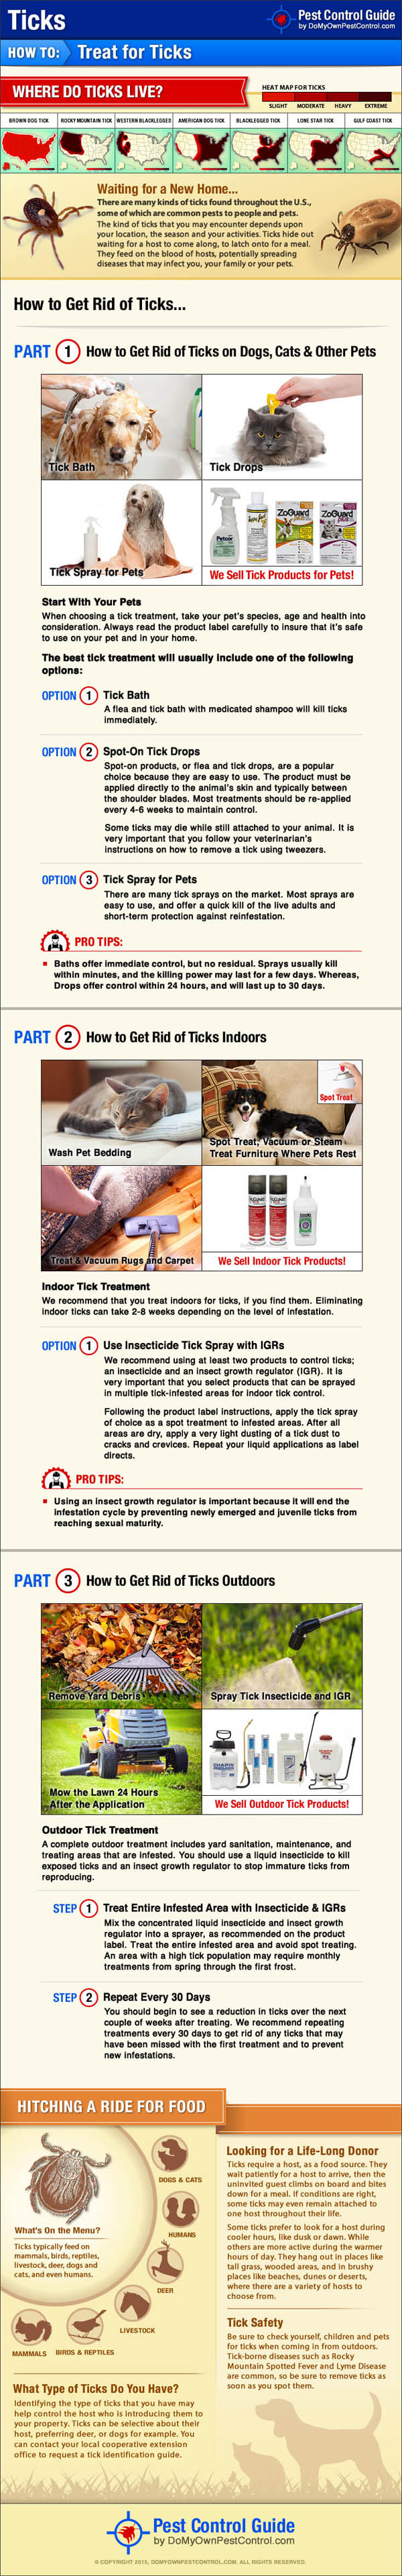 INFOGRAPHICS - CLICK TO SEE IN FULL SIZE!!! - HOW TO GET RID OF DOG TICKS